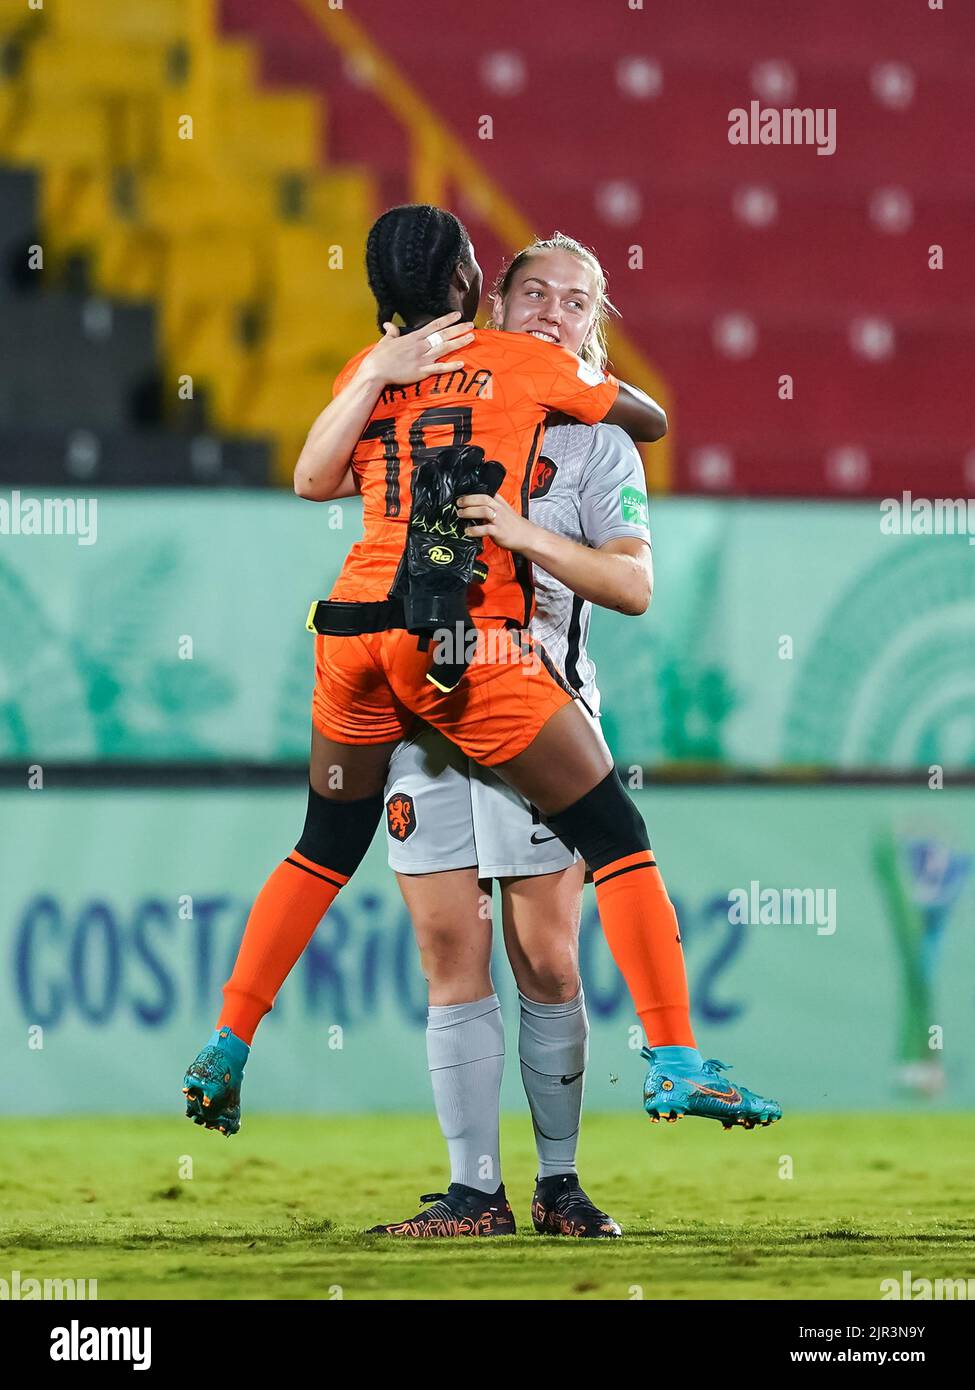 Alajuela, Costa Rica. 21st Aug, 2022. Alajuela, Costa Rica, August 21st 2022: Shi-Jona Martina (18 Netherlands) and goalkeeper Claire Dinkla (1 Netherlands) celebrate their victory and entry into the semifinal during the FIFA U20 Womens World Cup Costa Rica 2022 quarterfinal football match between Nigeria and Netherlands at Morera Soto in Alajuela, Costa Rica. (Daniela Porcelli/SPP) Credit: SPP Sport Press Photo. /Alamy Live News Stock Photo